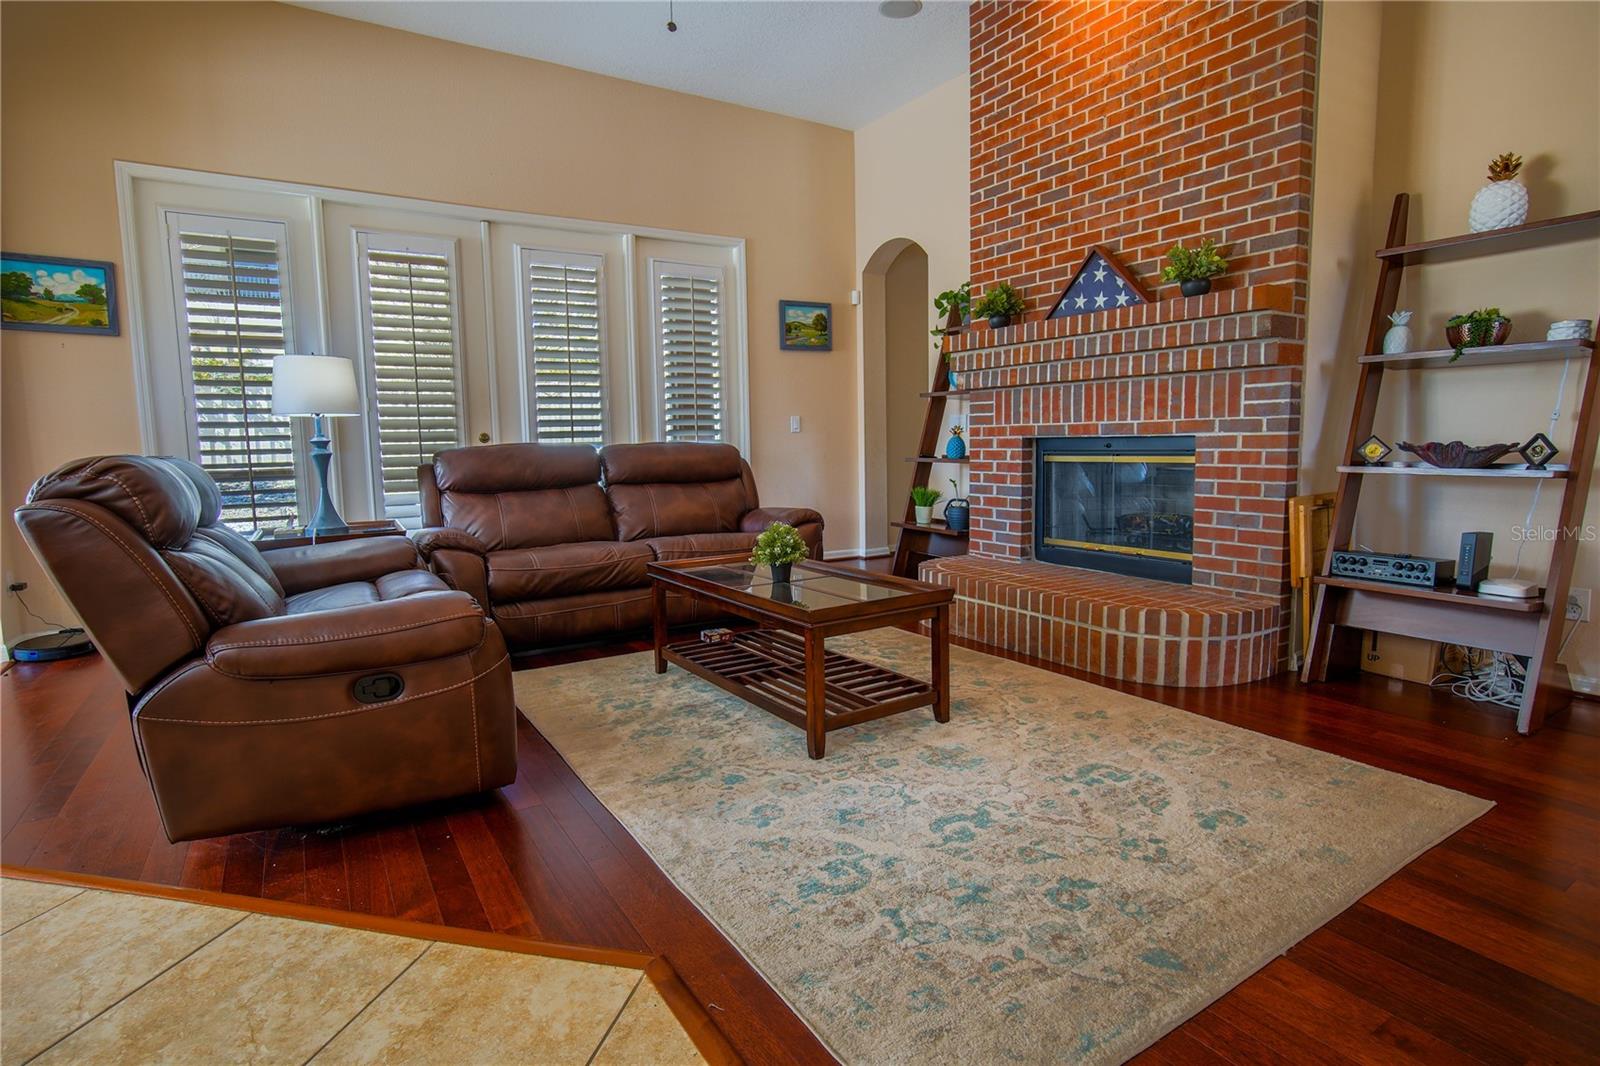 Family Room/Fireplace